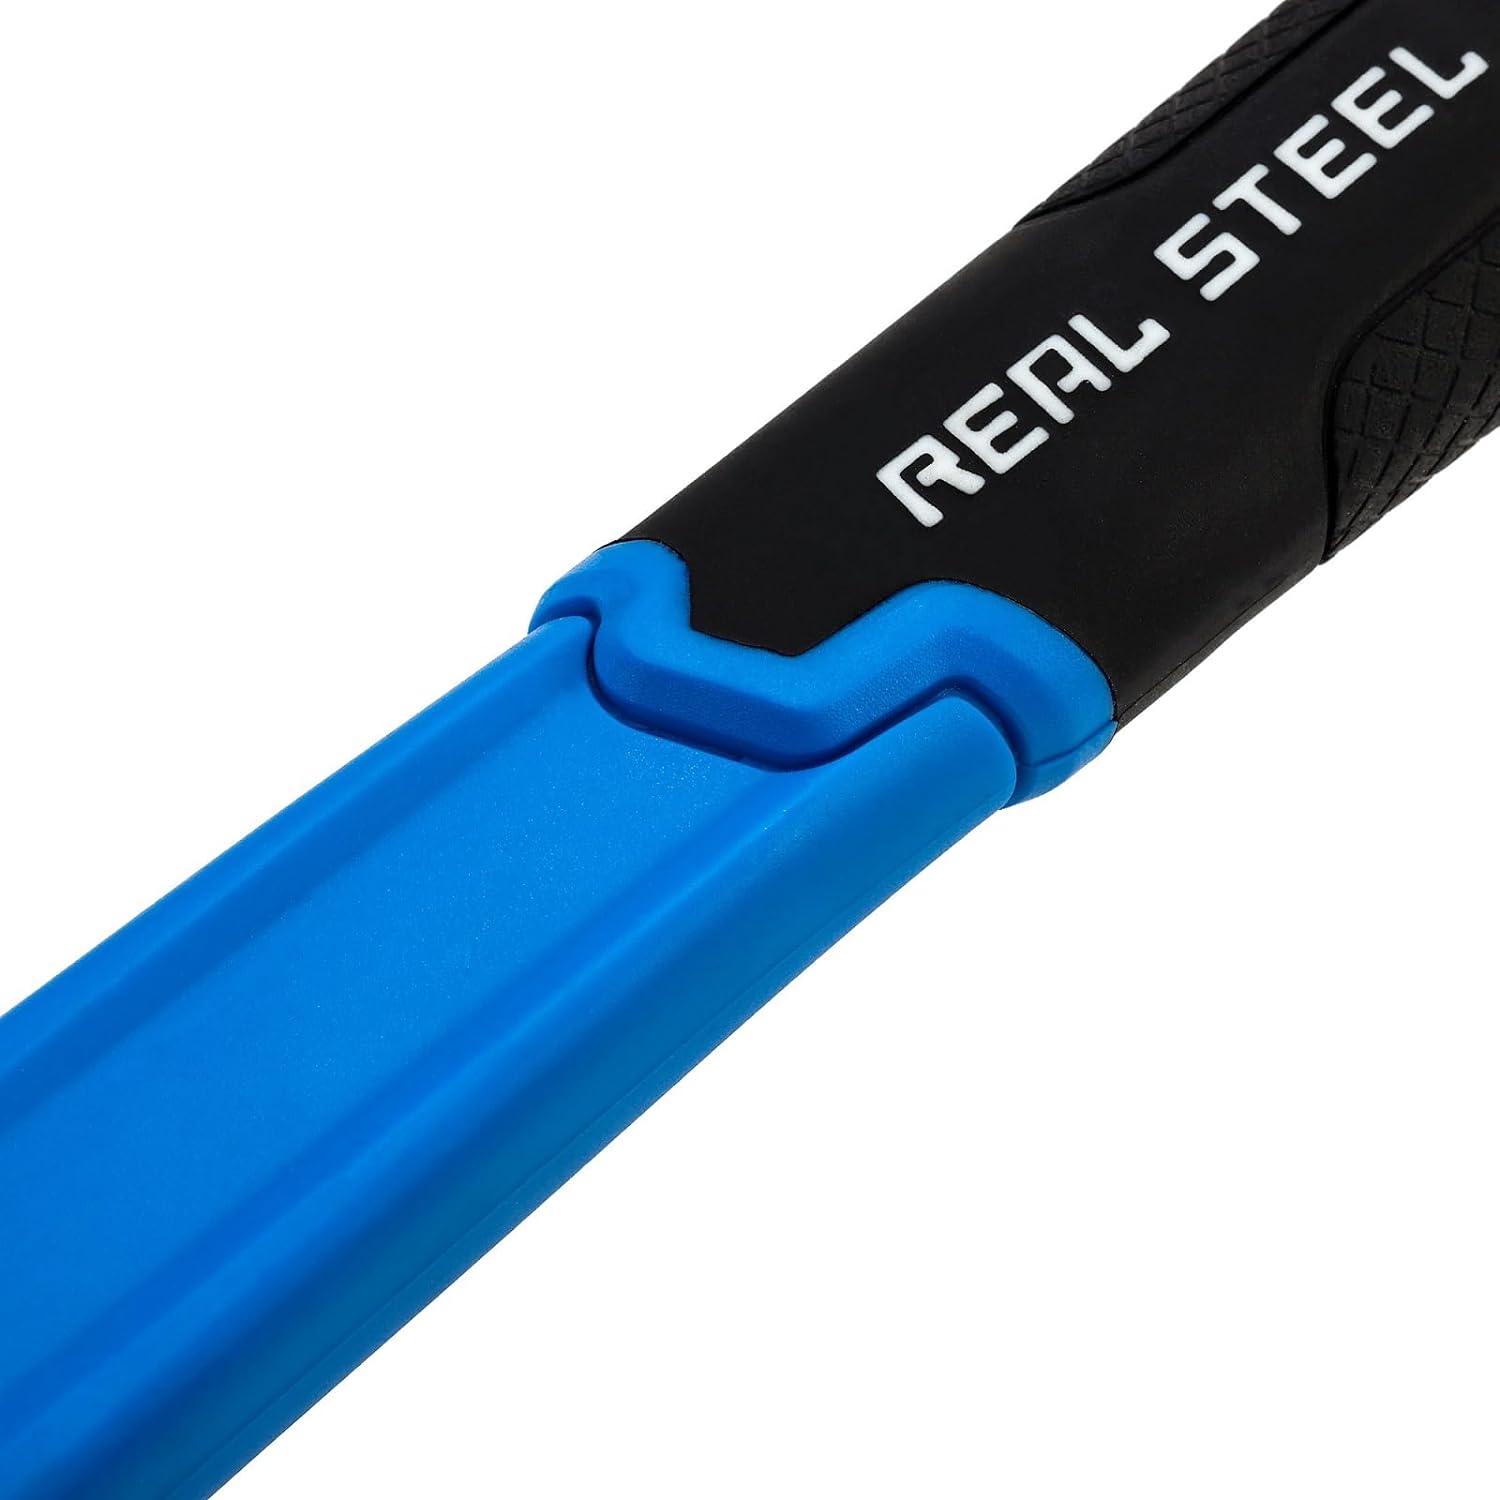 Real Steel Hammer Machinist 600g 21oz Graph. Handle Real Steel RSH0554 Power Tool Services